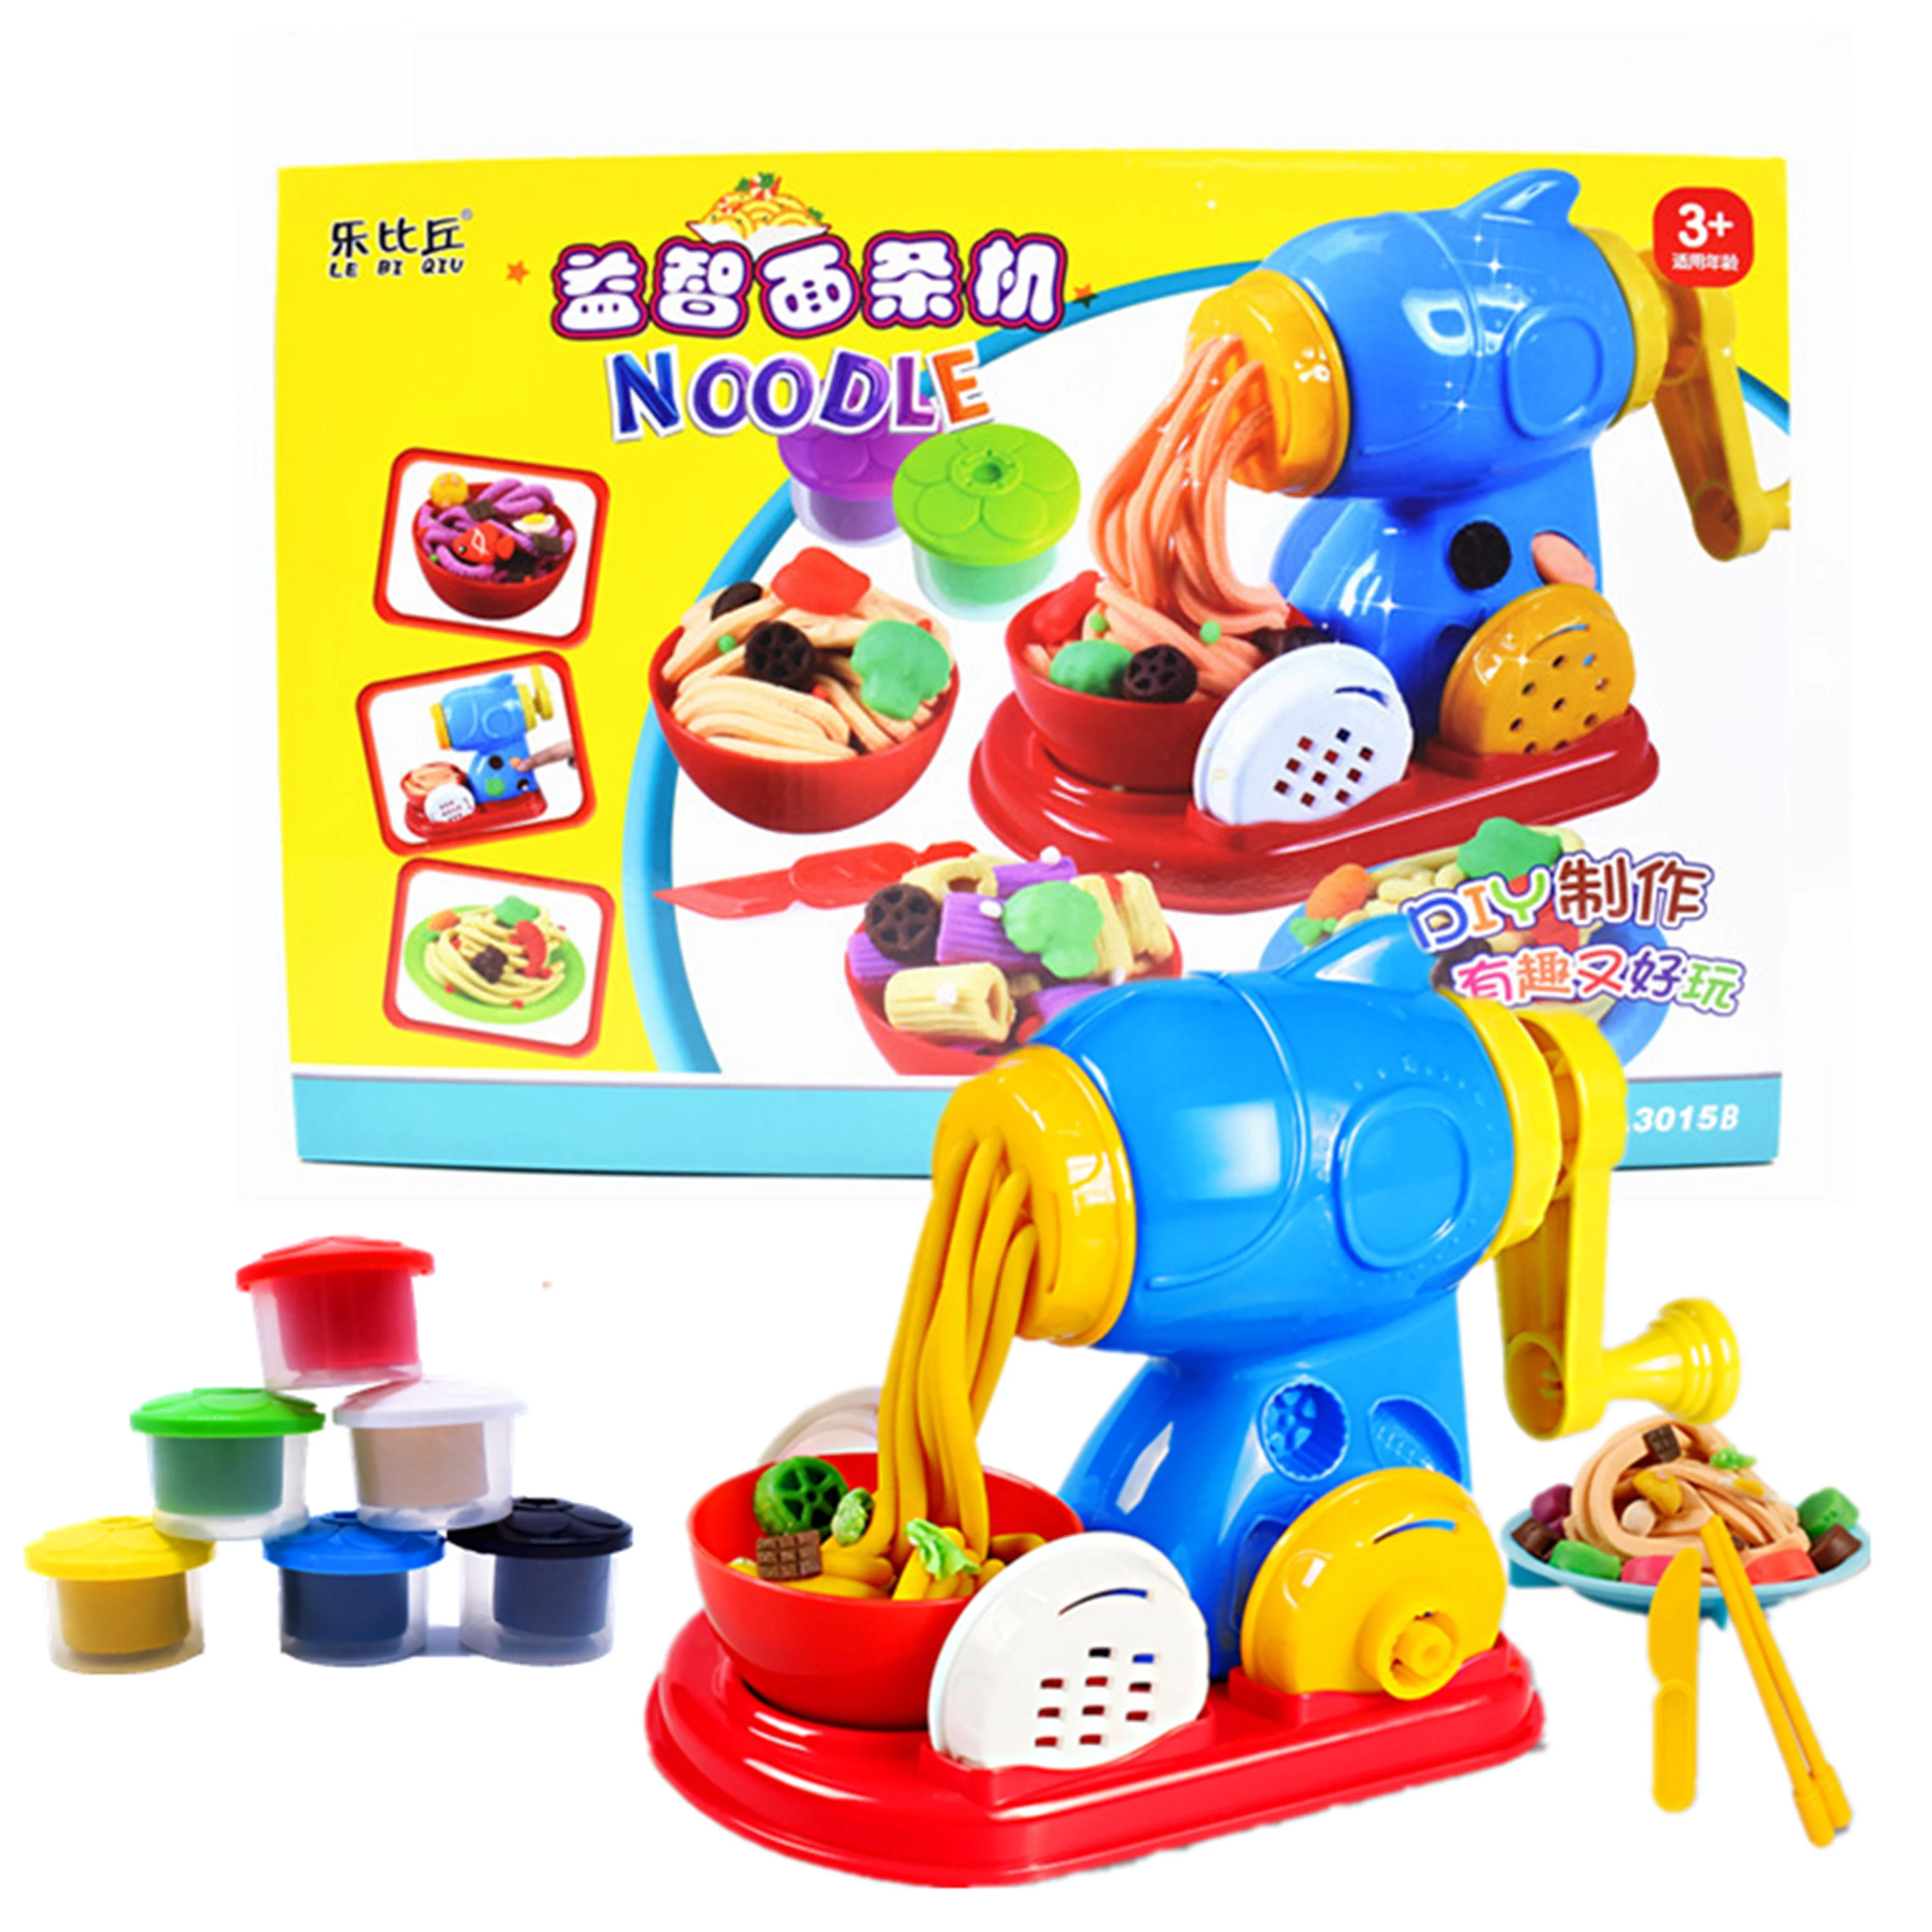 Kitchen small tools Plasticine Educational kitchen sets toys cooking Modeling Clay Playdough kitchen tools smart